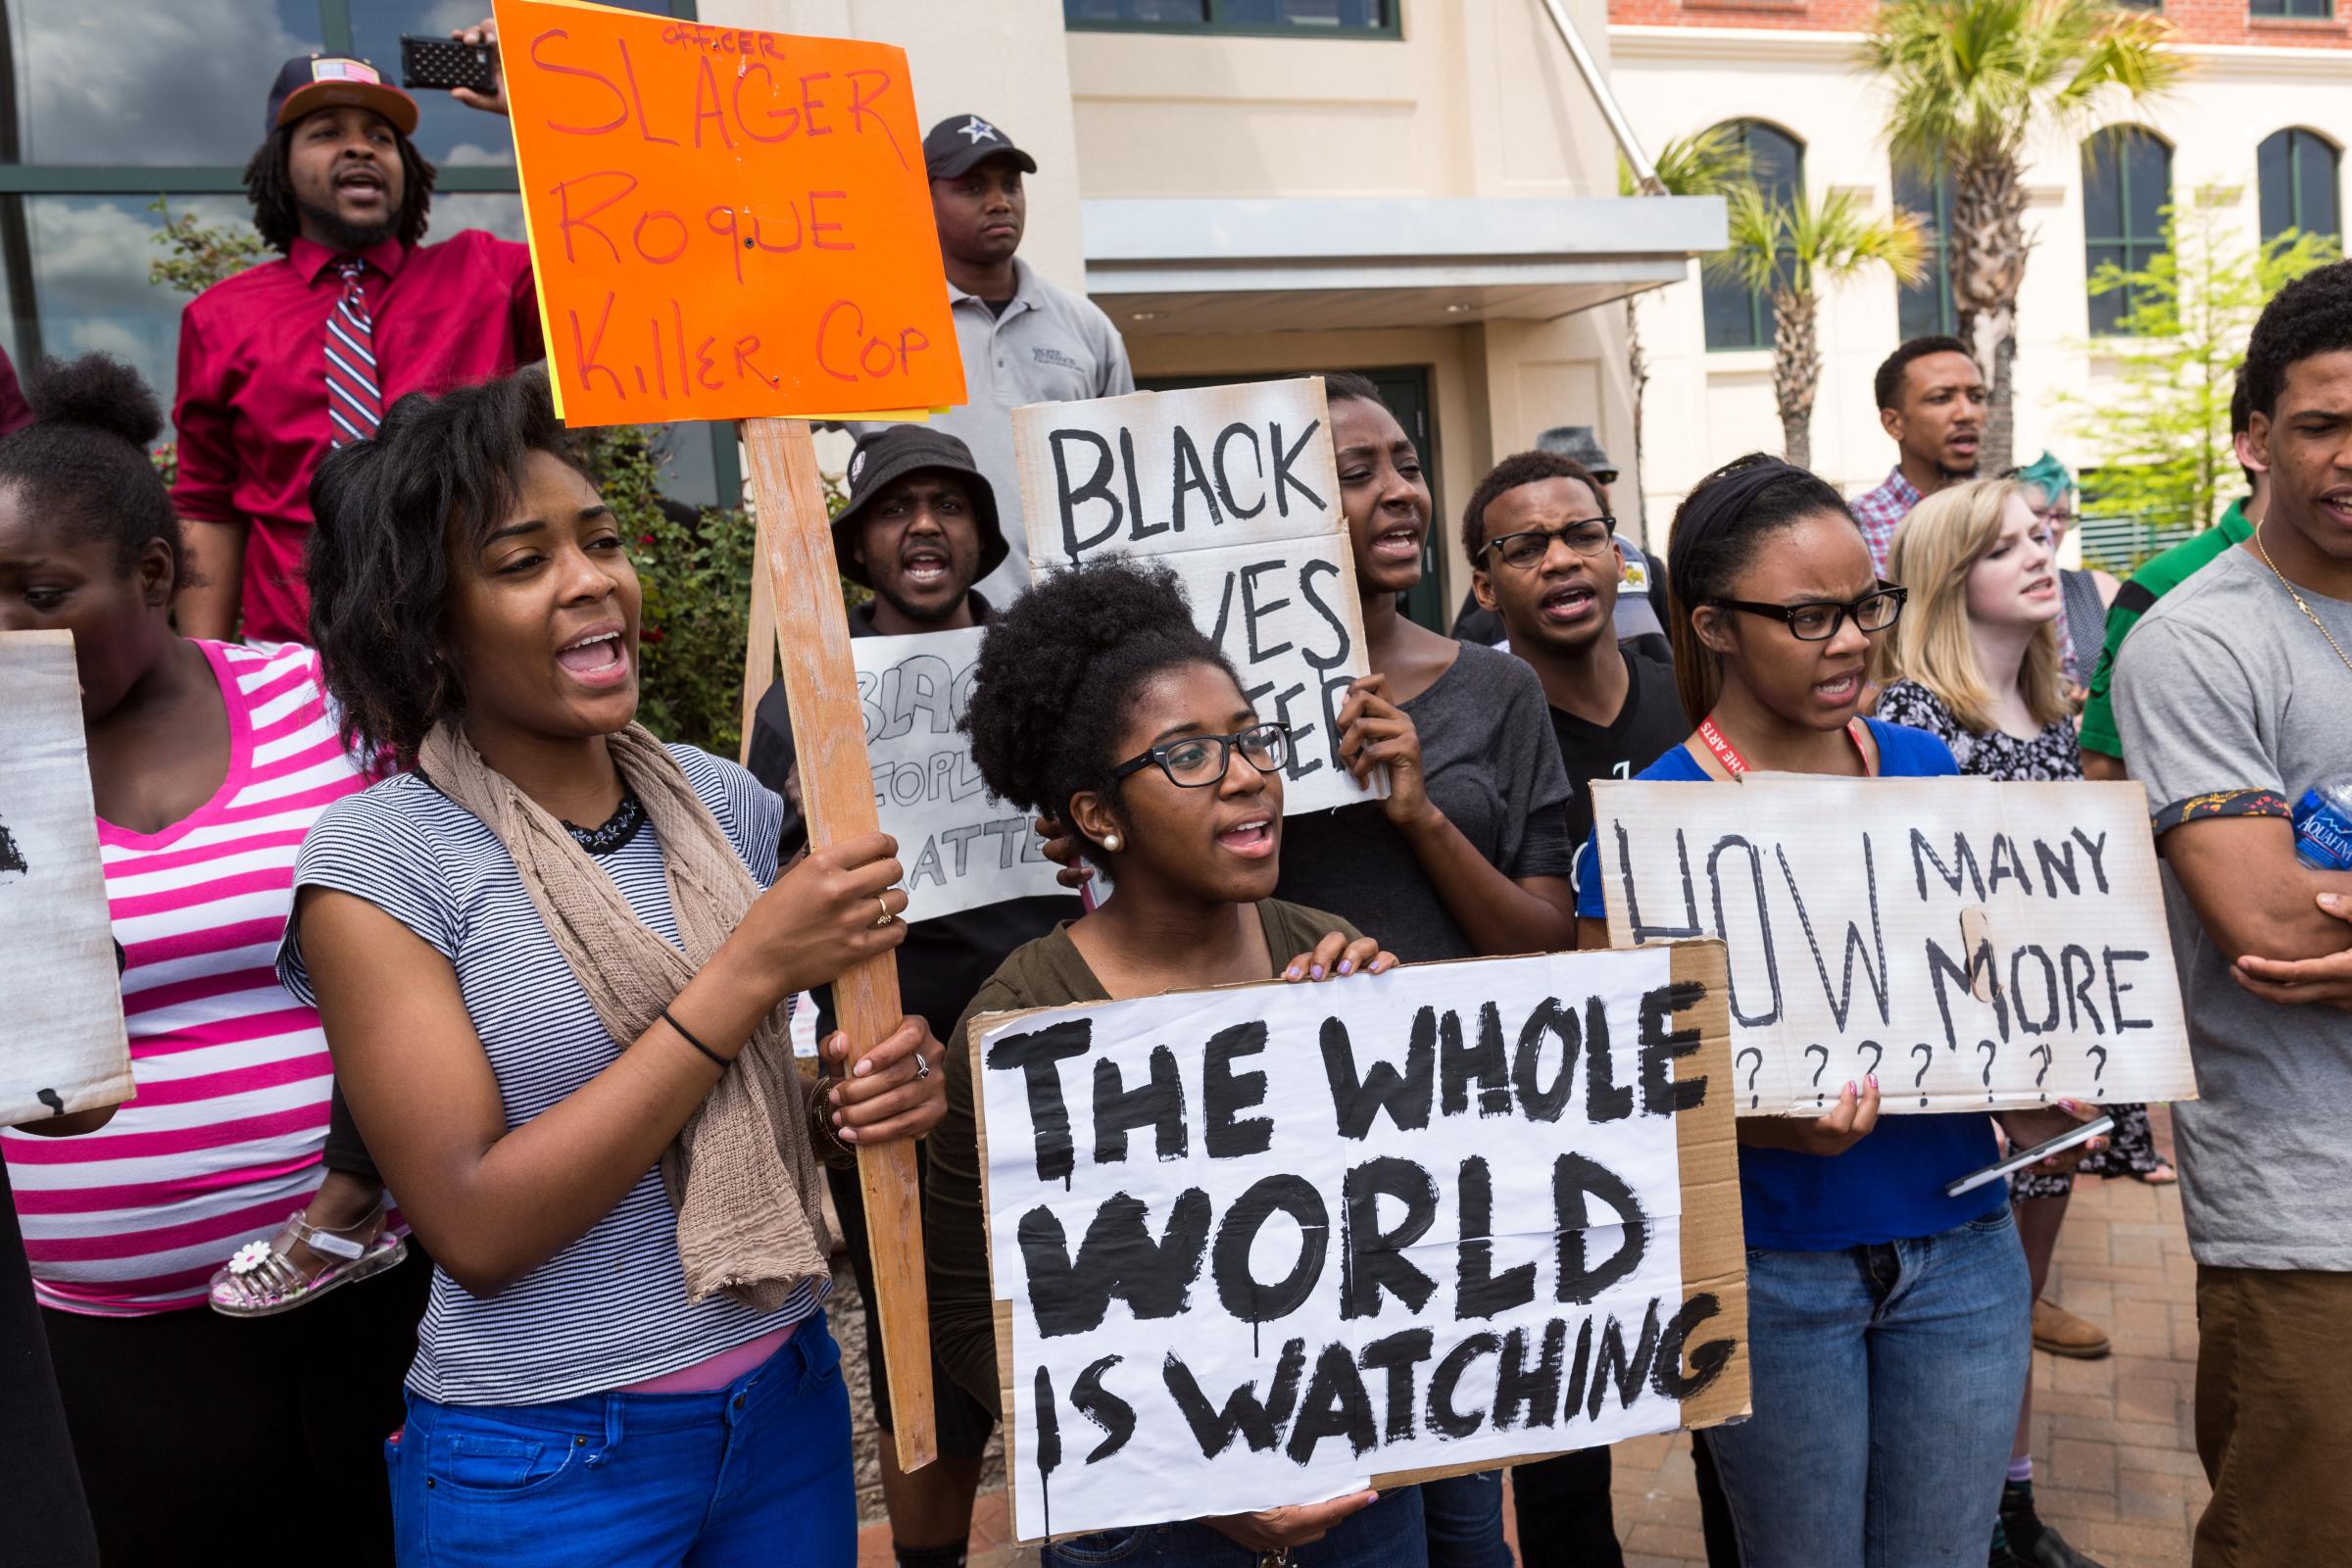 People participate in a rally to protest the death of Walter Scott, who was killed by police in a shooting, outside City Hall in North Charleston, S.C. on April 8, 2015.